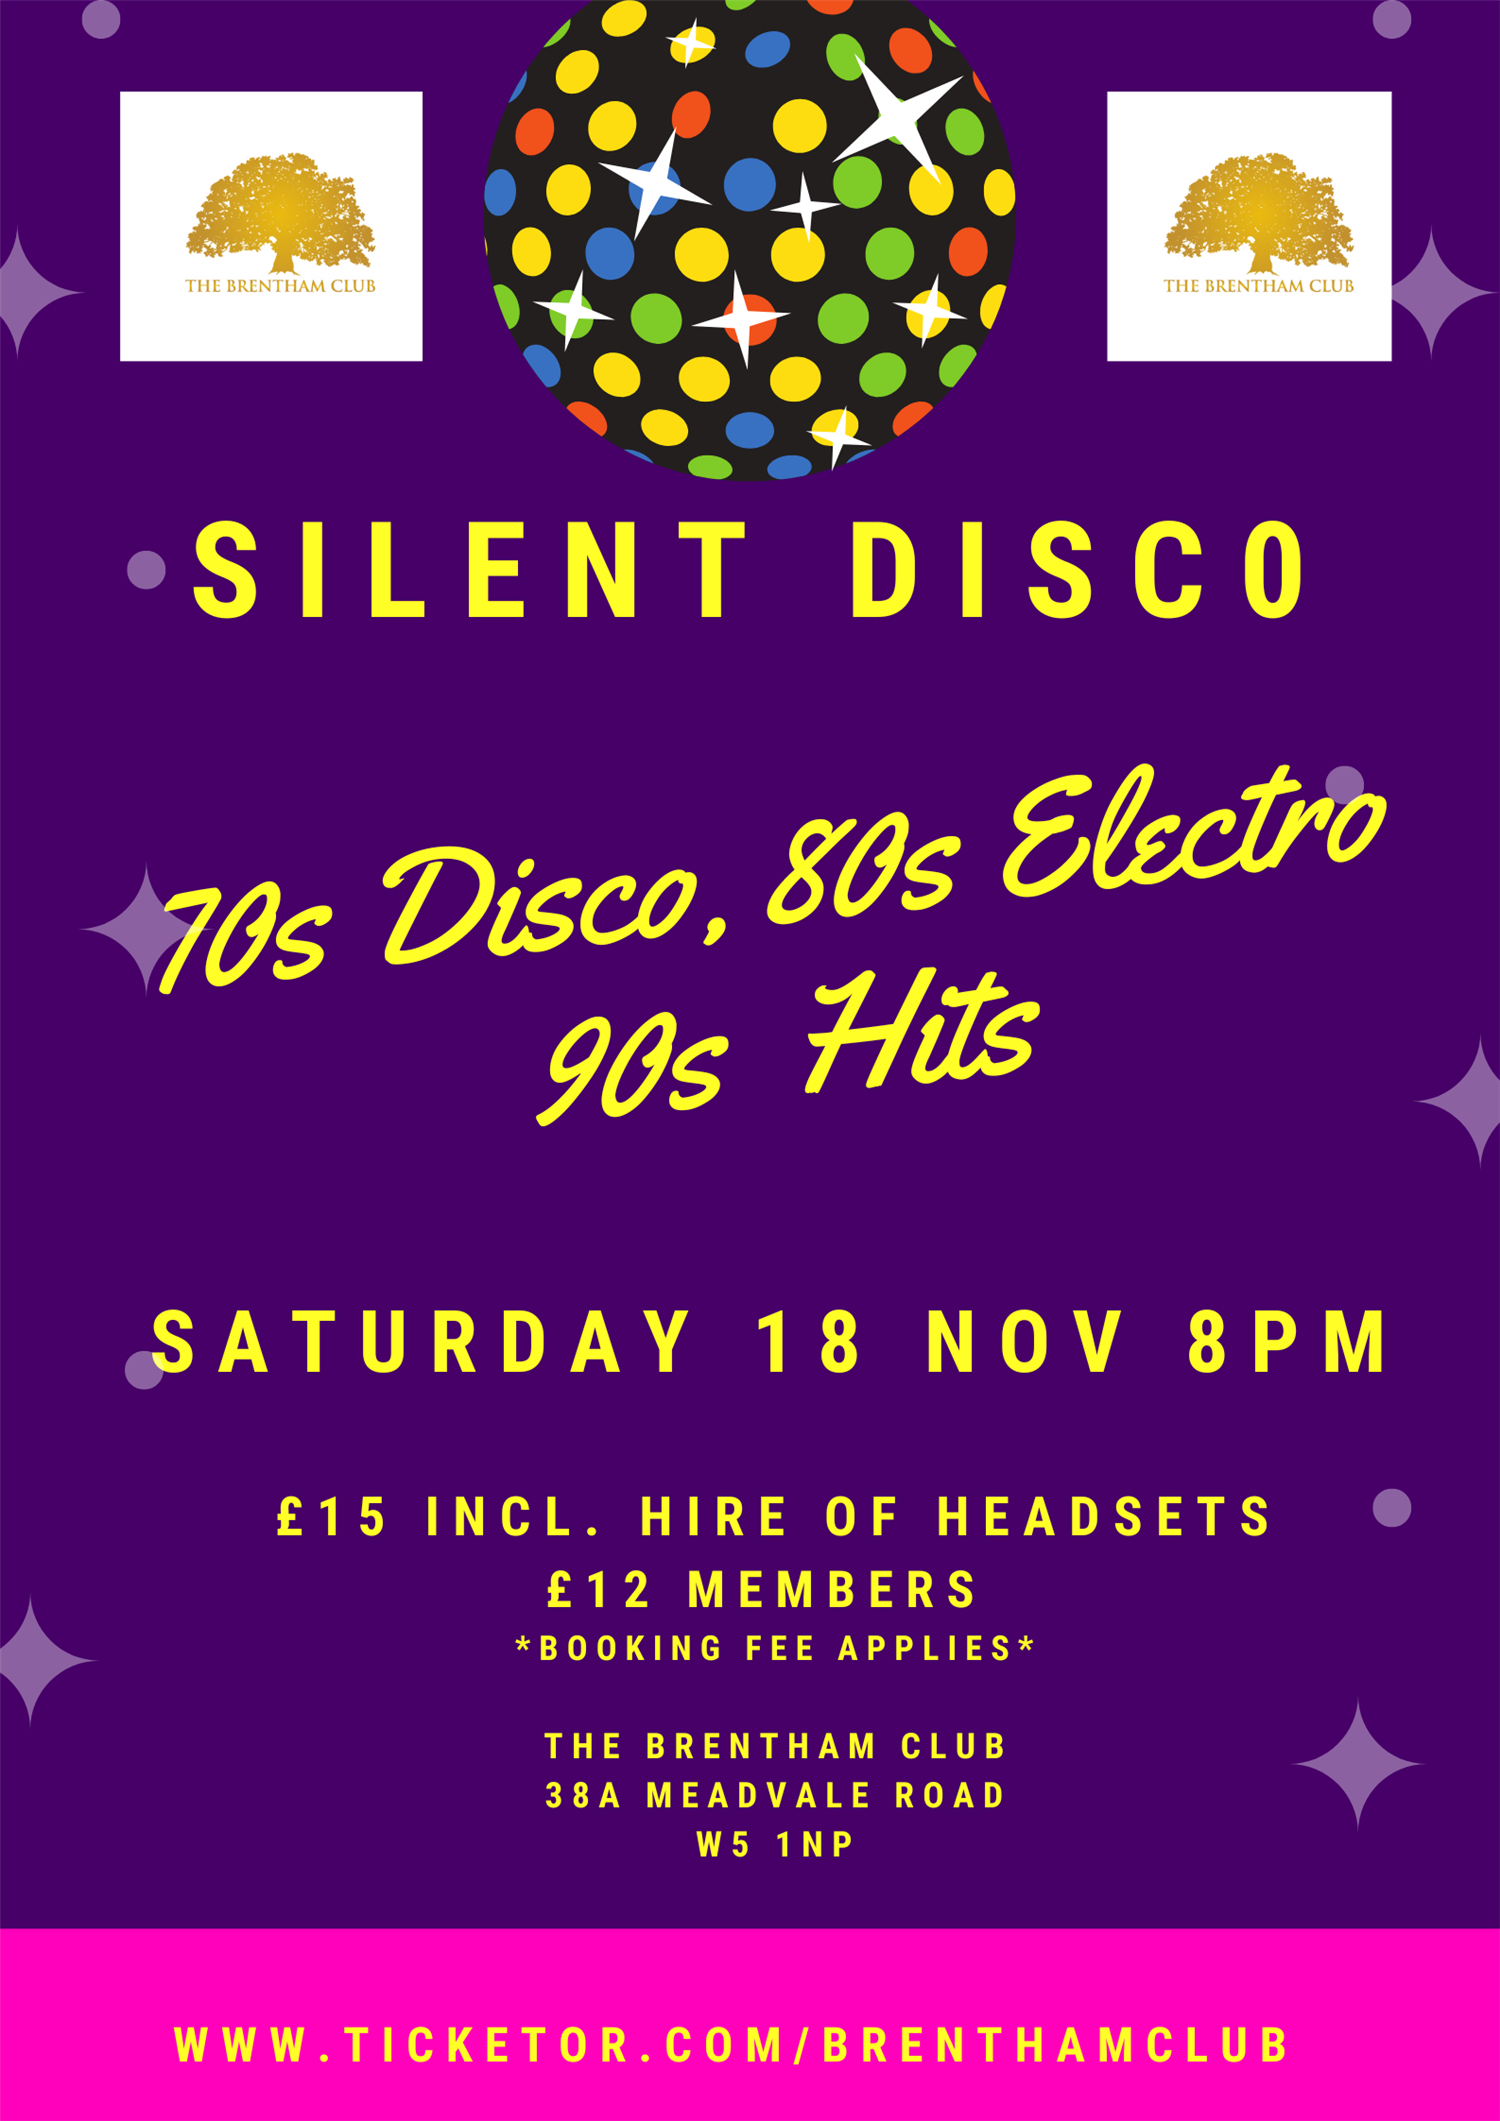 Silent Disco 70sDisco, 80s Electro, 90s Hits on Nov 18, 20:00@The Brentham Club - Buy tickets and Get information on Brenthamclub.co.uk 